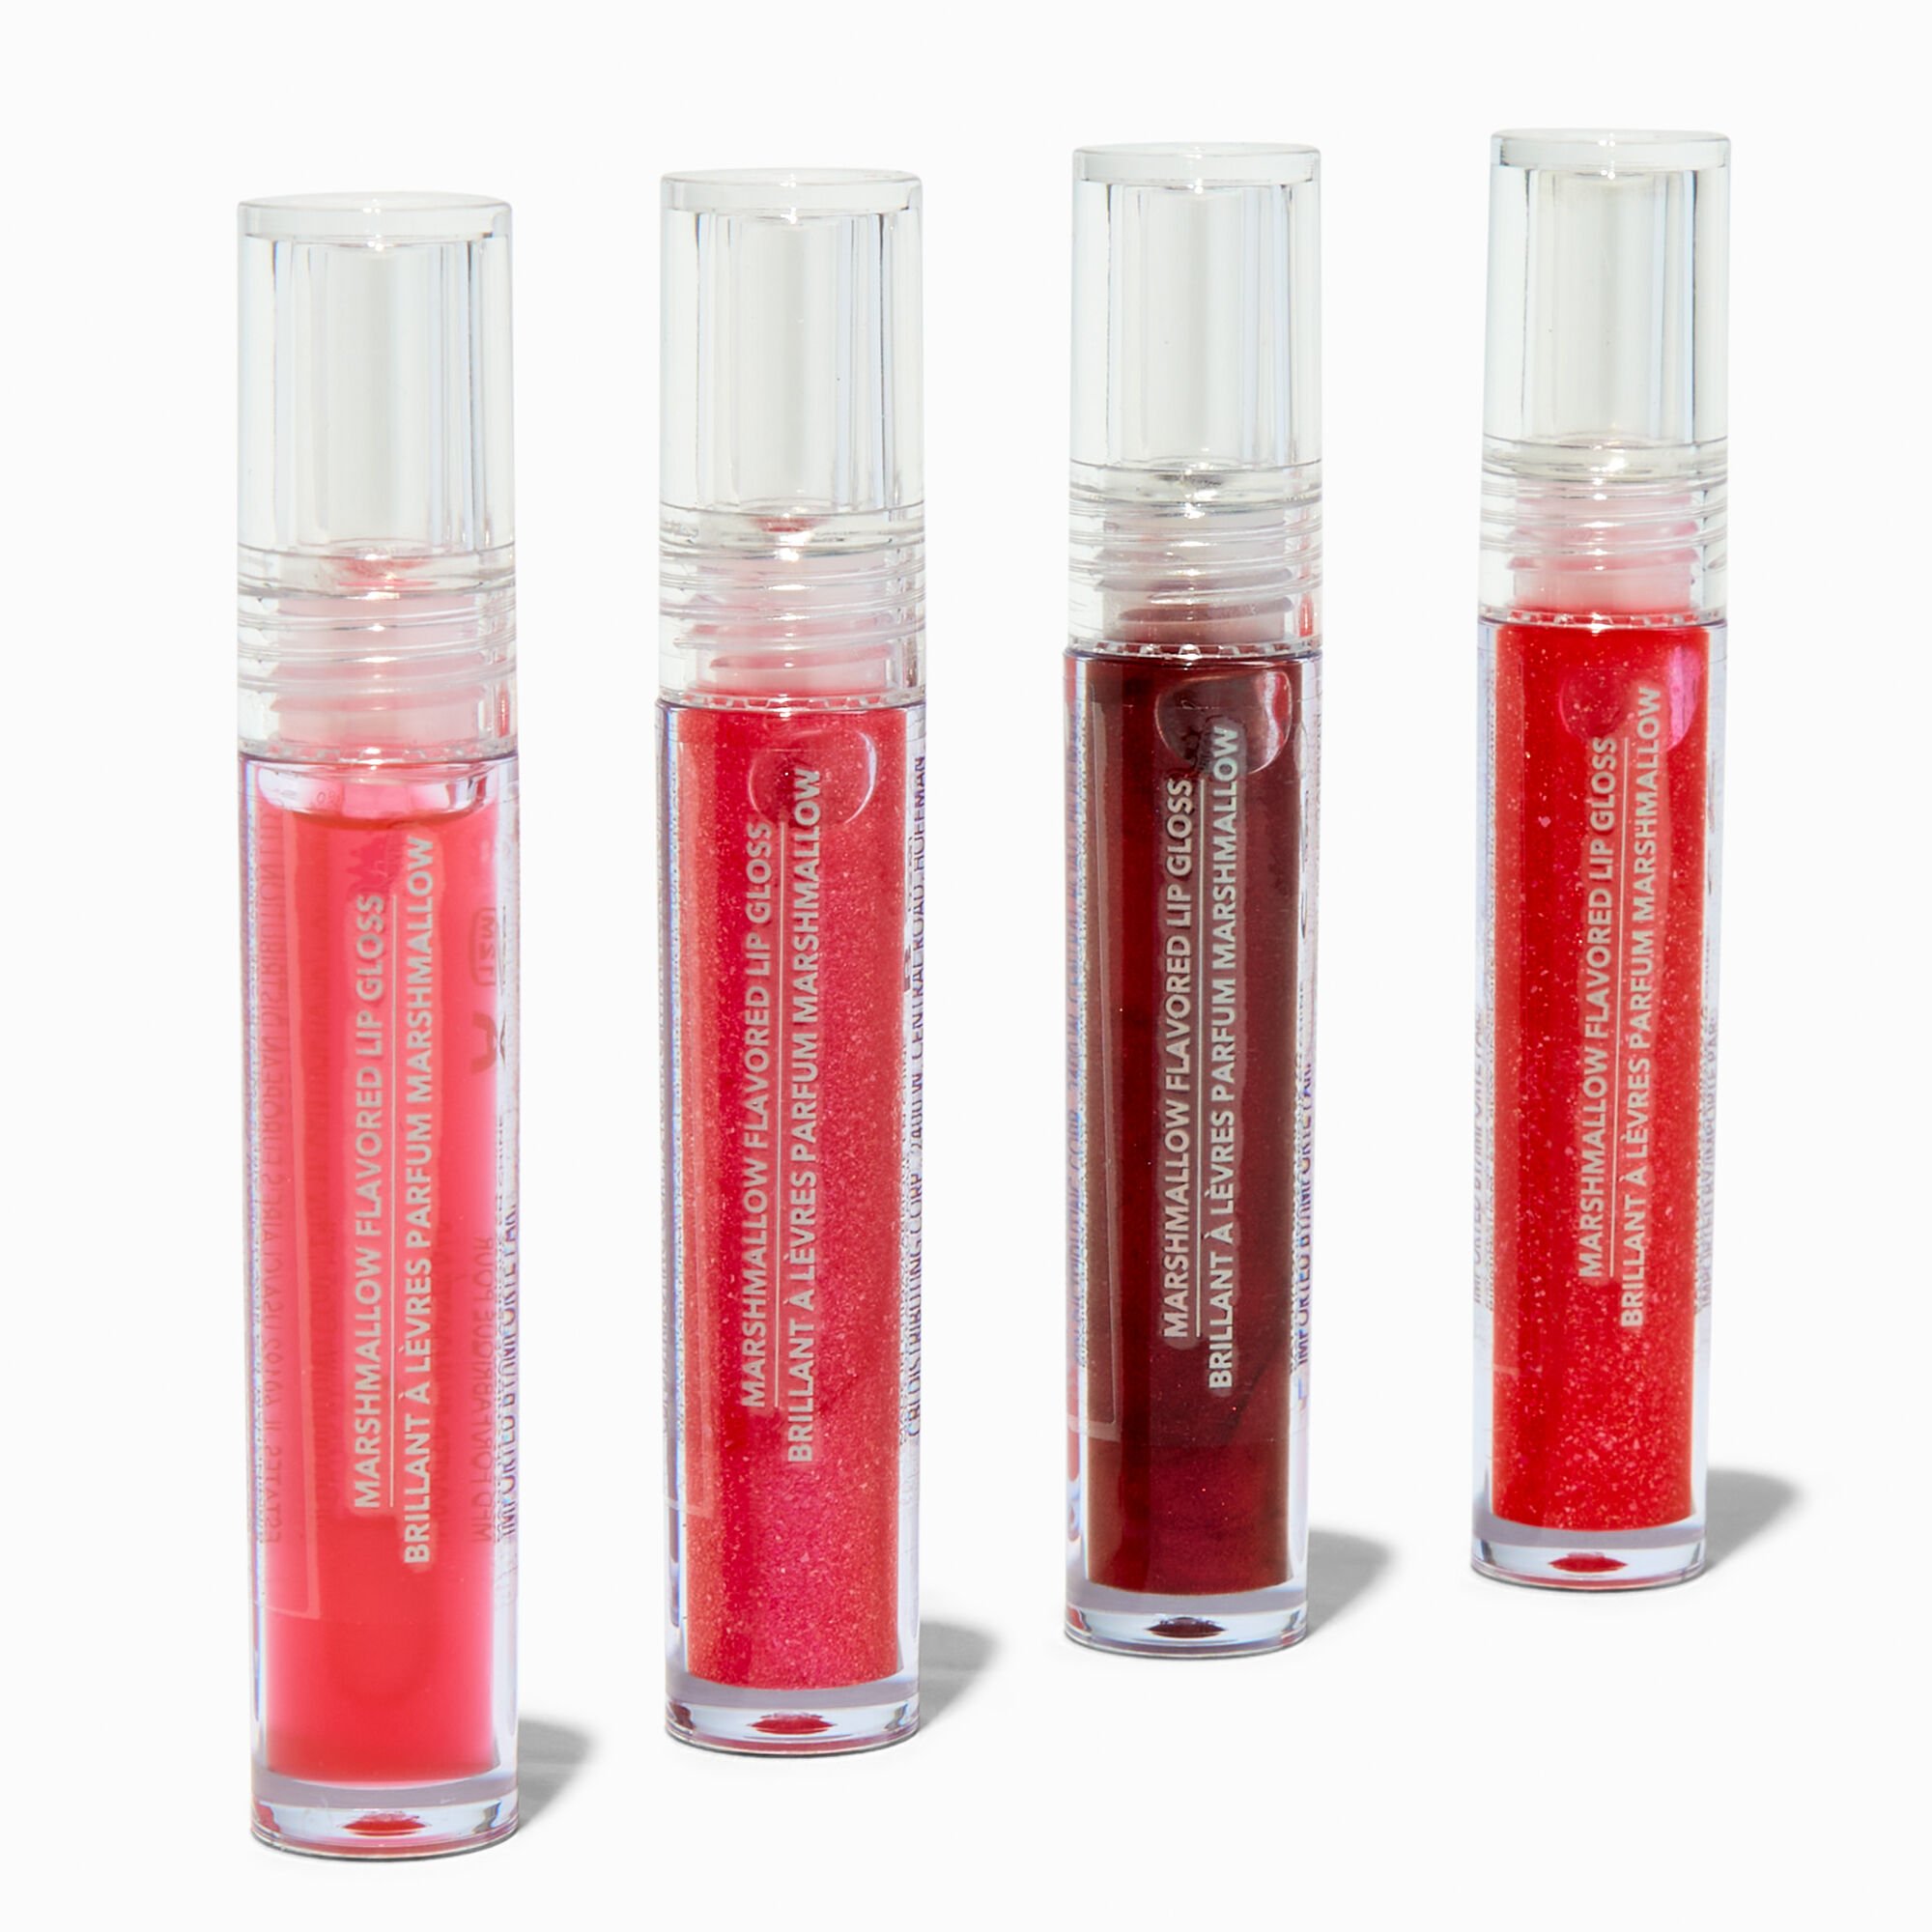 View Claires Glitter Lip Gloss Set 4 Pack Red information